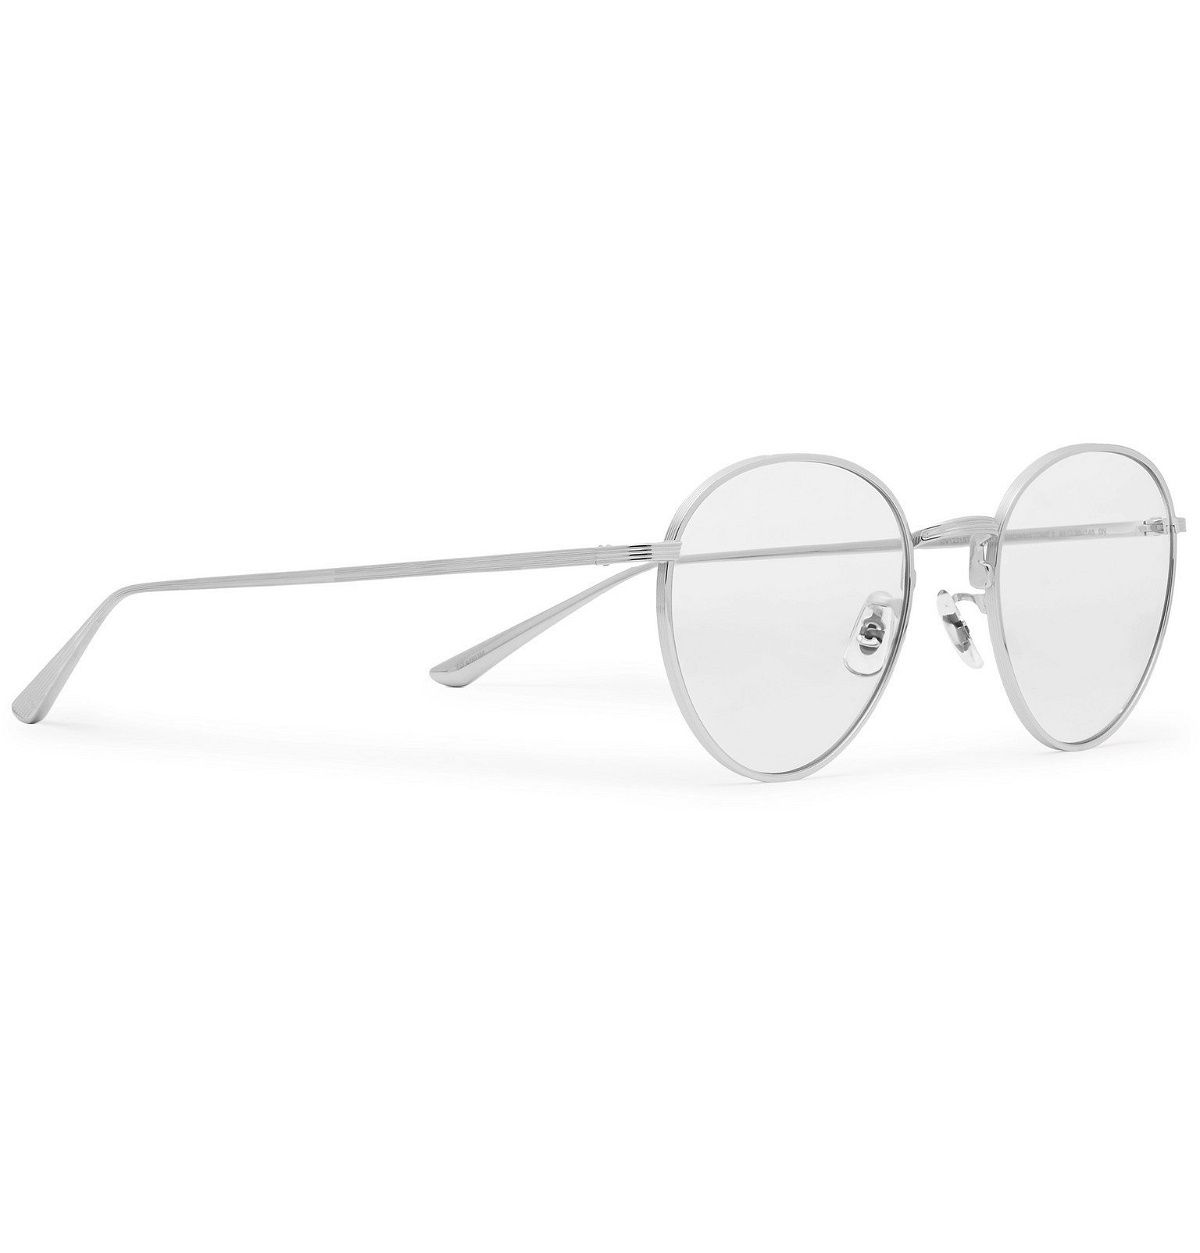 OLIVER PEOPLES THE ROW｜BROWNSTONE サングラス | endageism.com